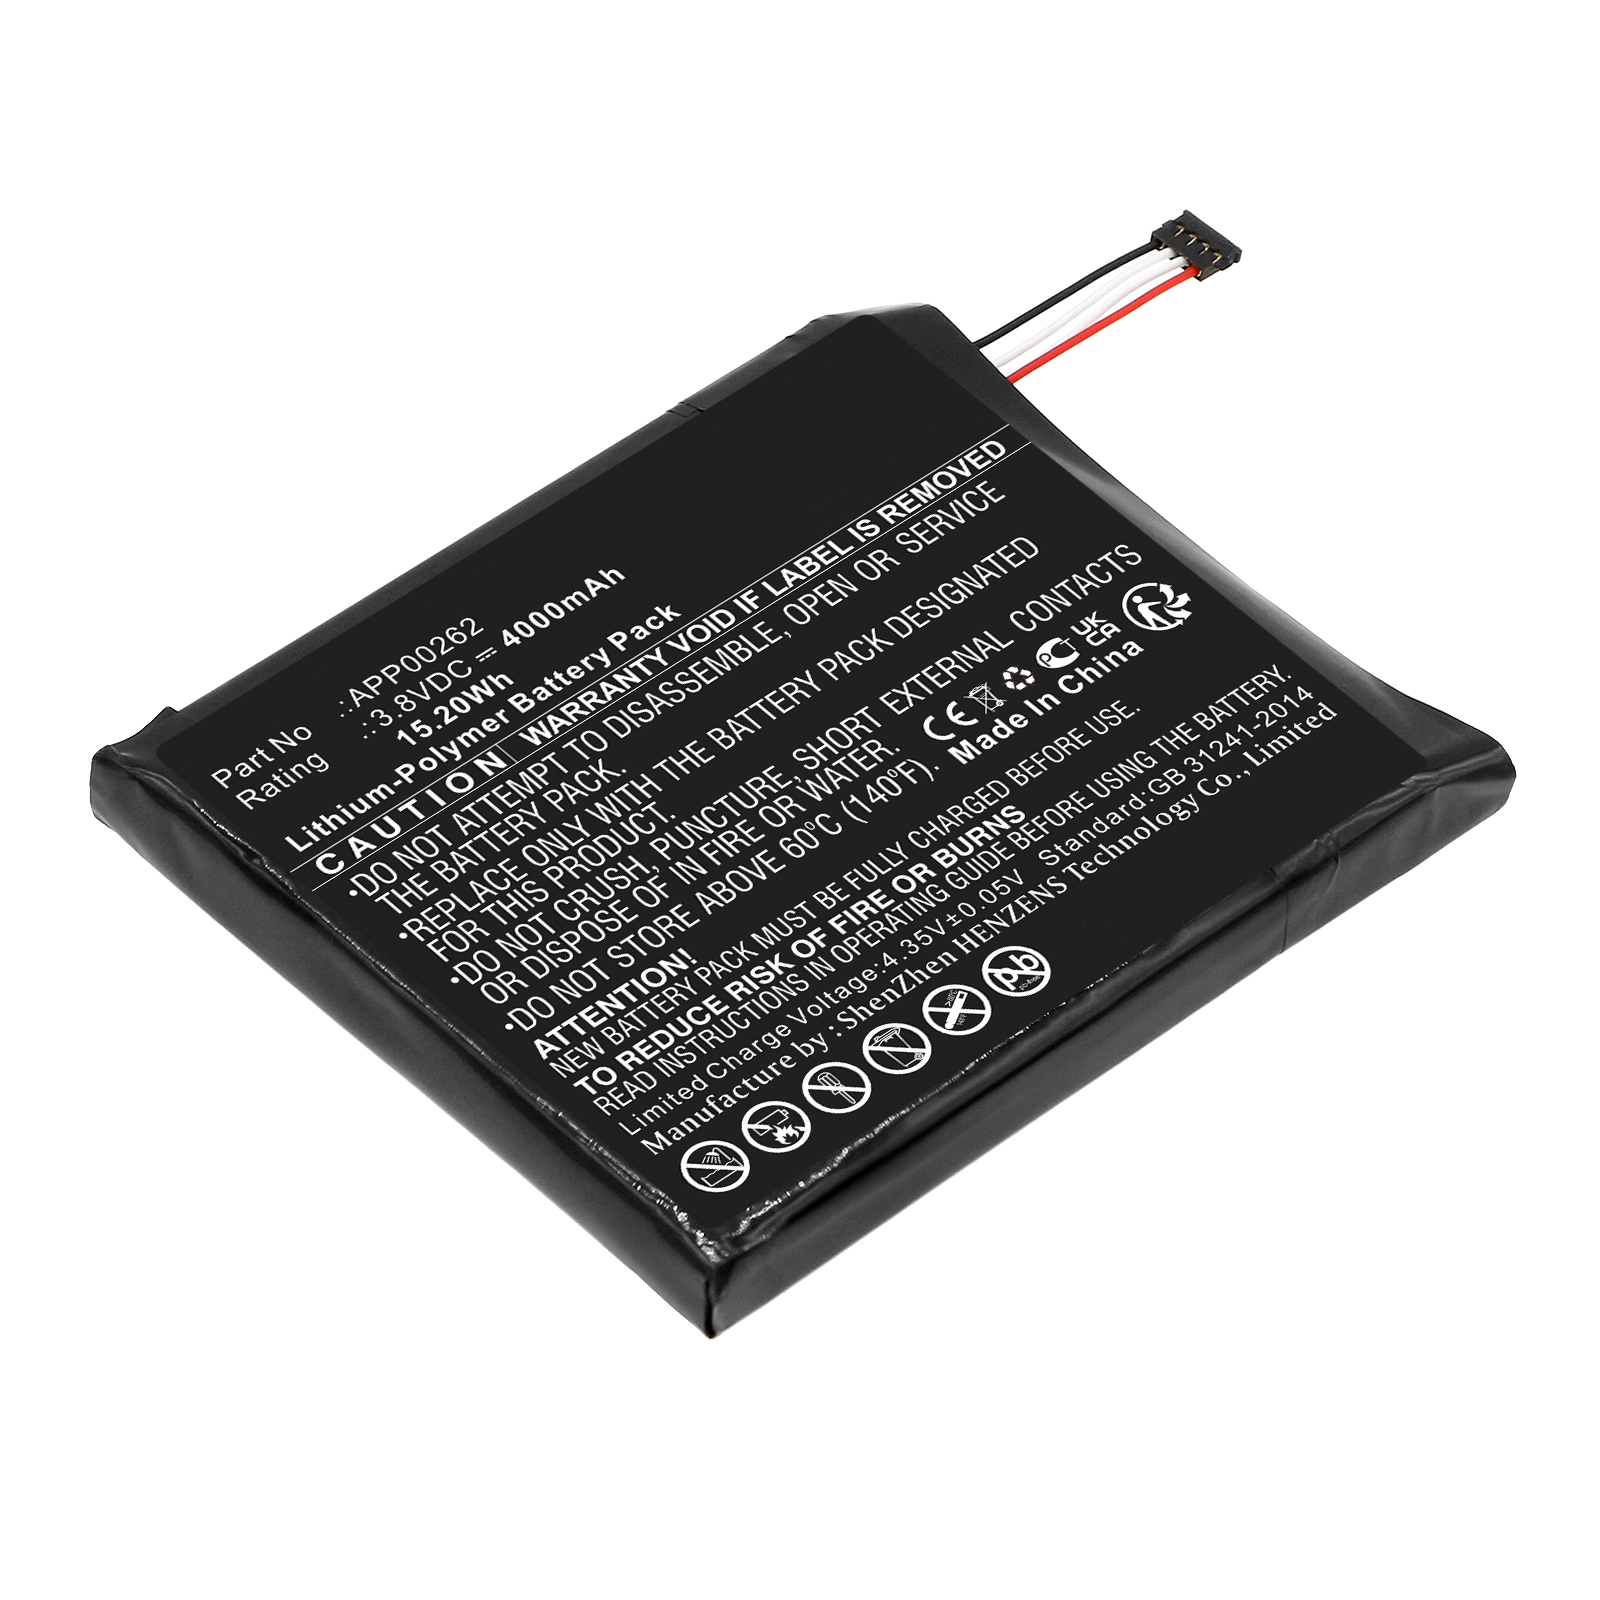 Synergy Digital Cell Phone Battery, Compatible with CAT APP00262 Cell Phone Battery (Li-Pol, 3.8V, 4000mAh)